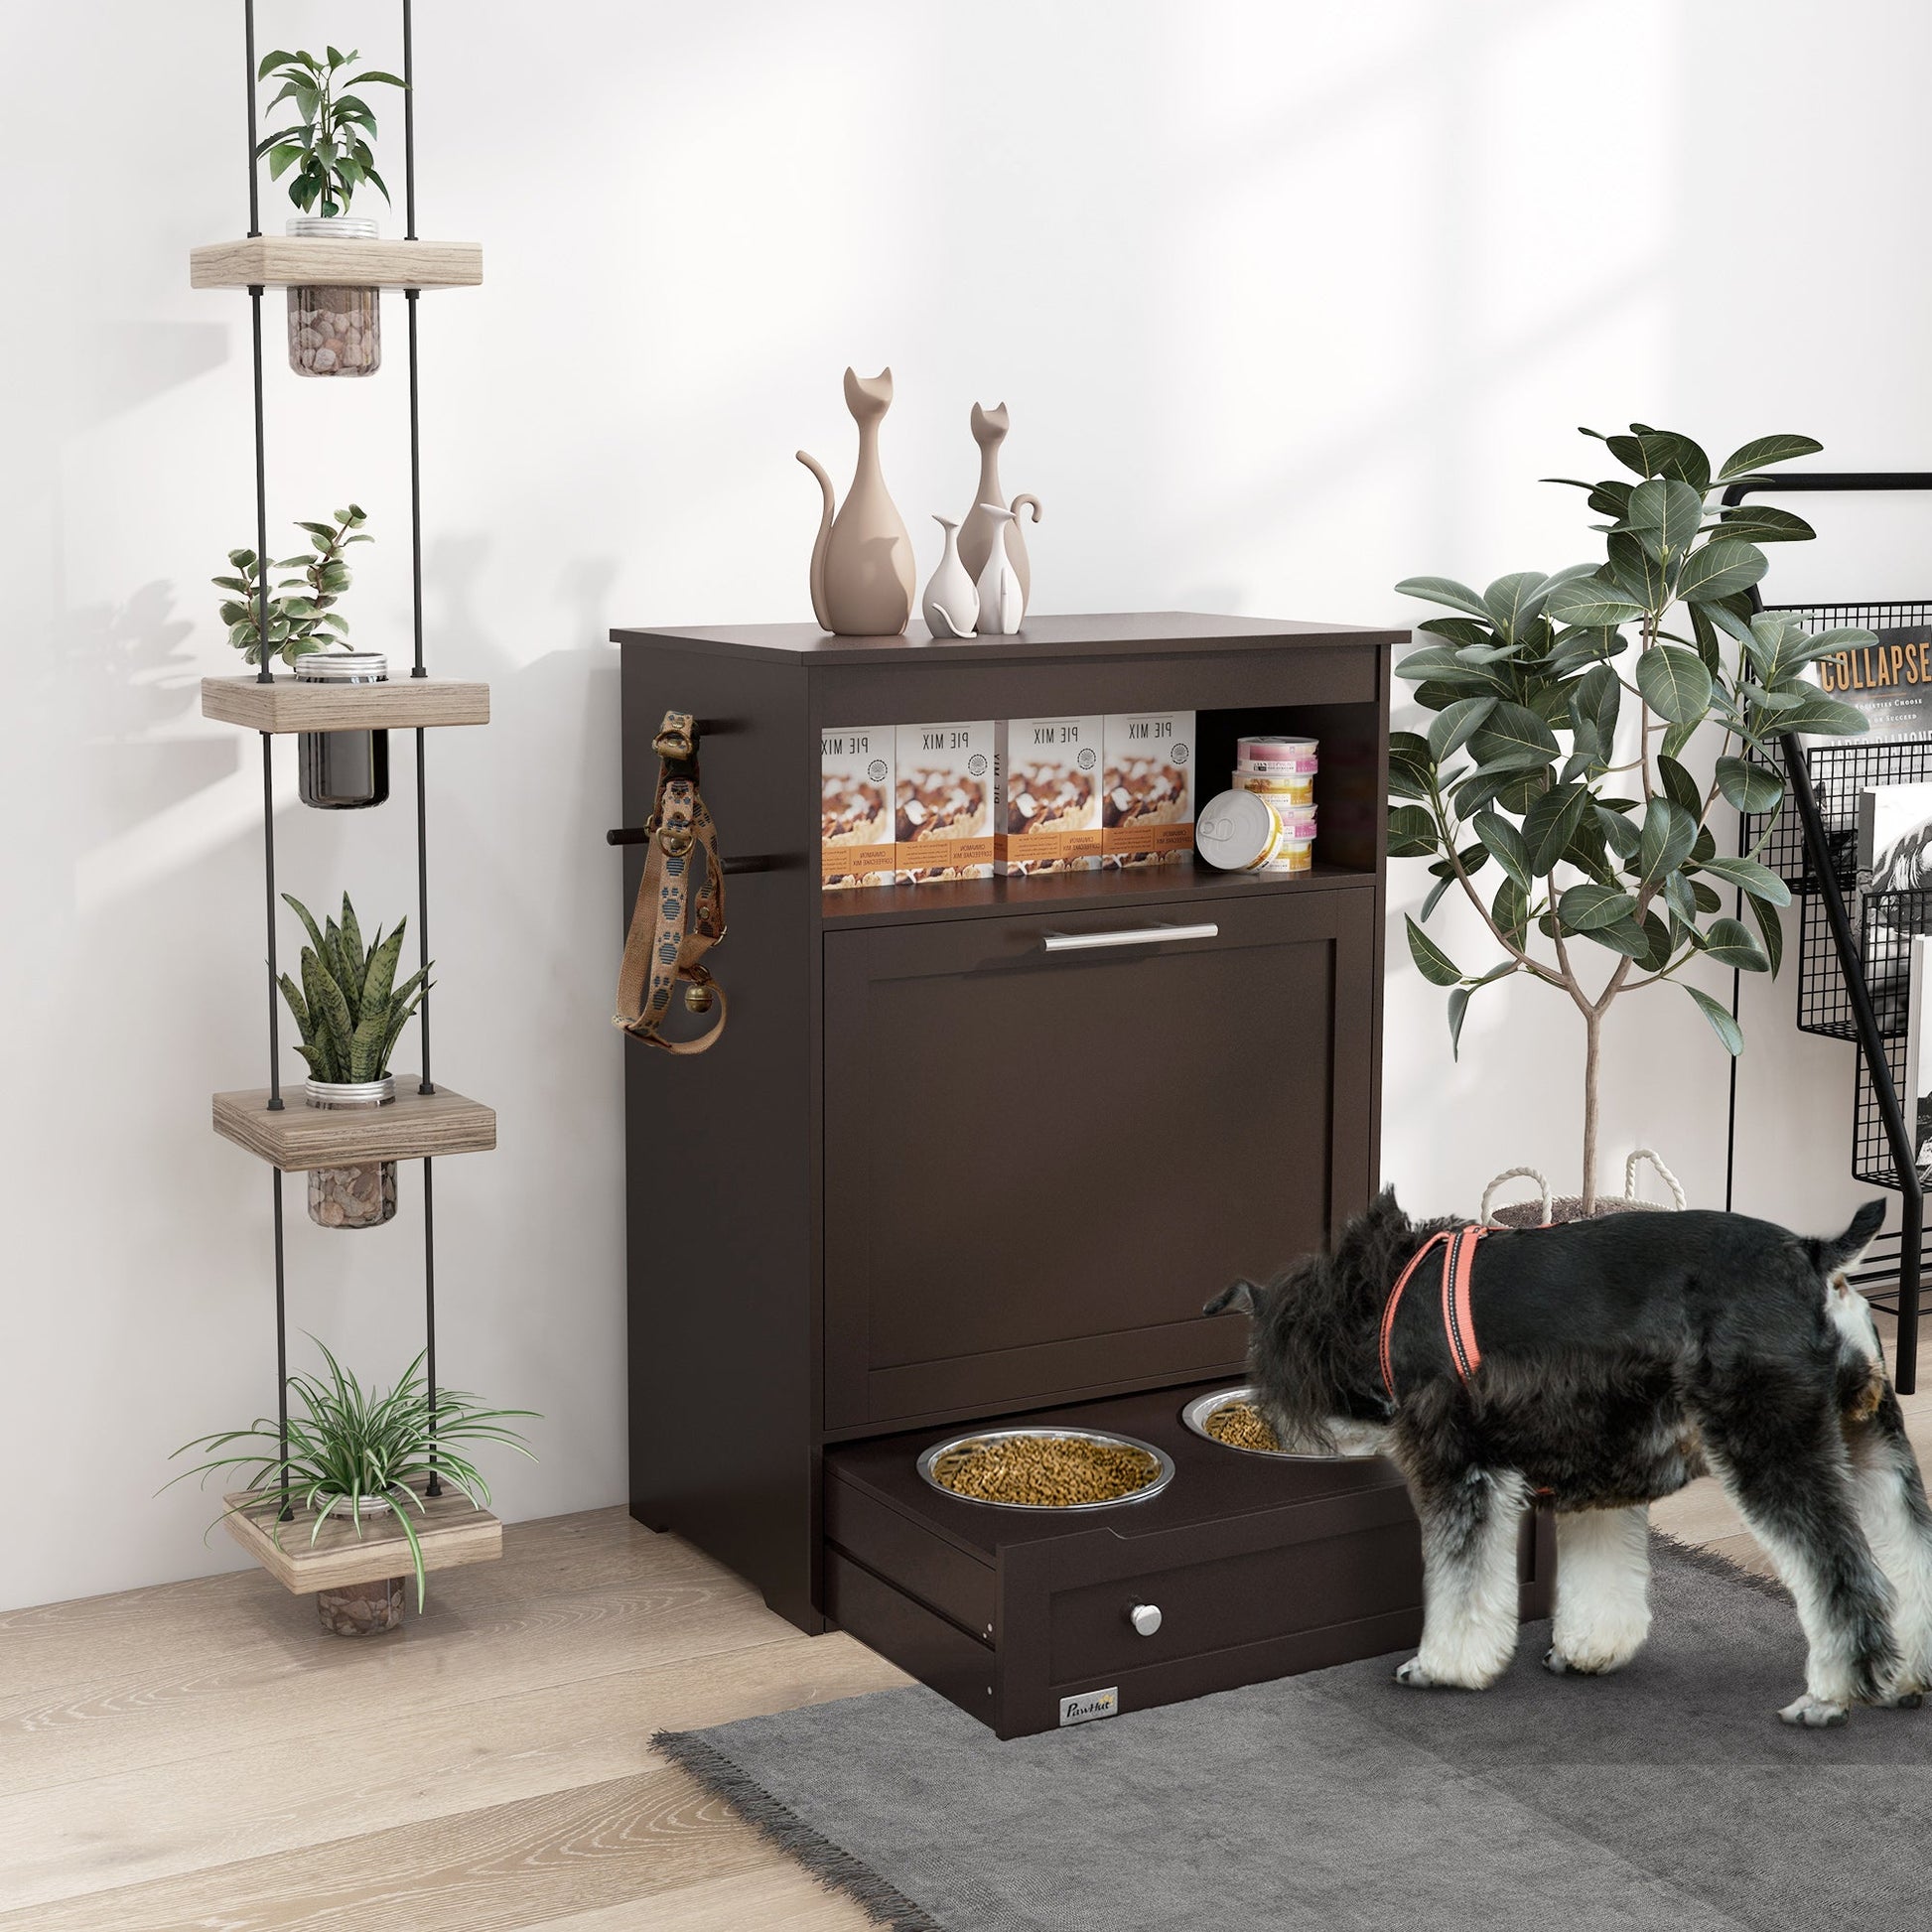 Pet Feeder Station Storage Cabinet, Dog Food Storage Container with Dog Raised Bowls, Watering Supplies, Coffee at Gallery Canada